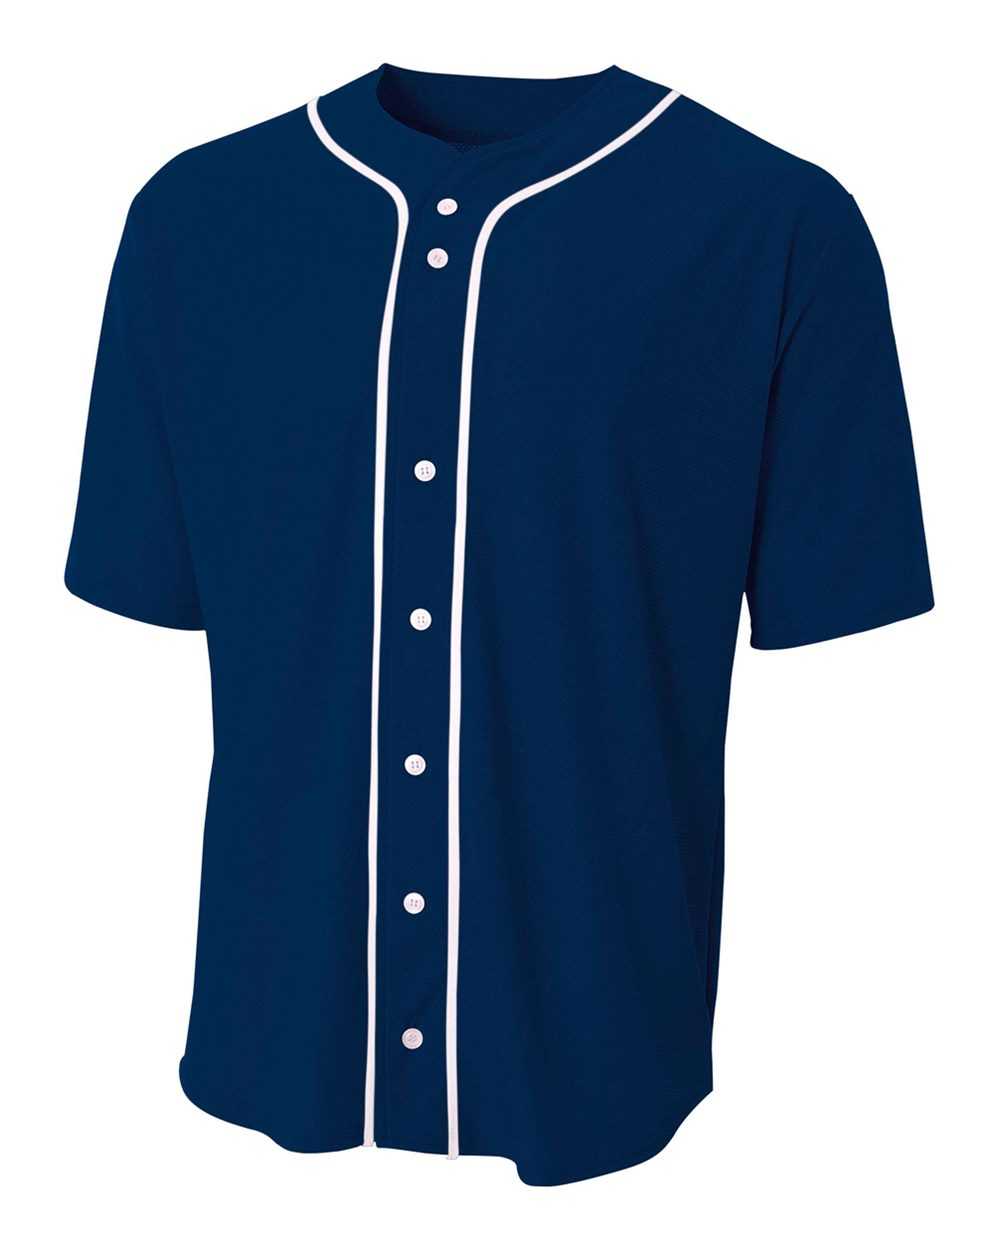 A4 NB4184 Youth Full Button Stretch Mesh Baseball Jersey - Navy White - HIT a Double